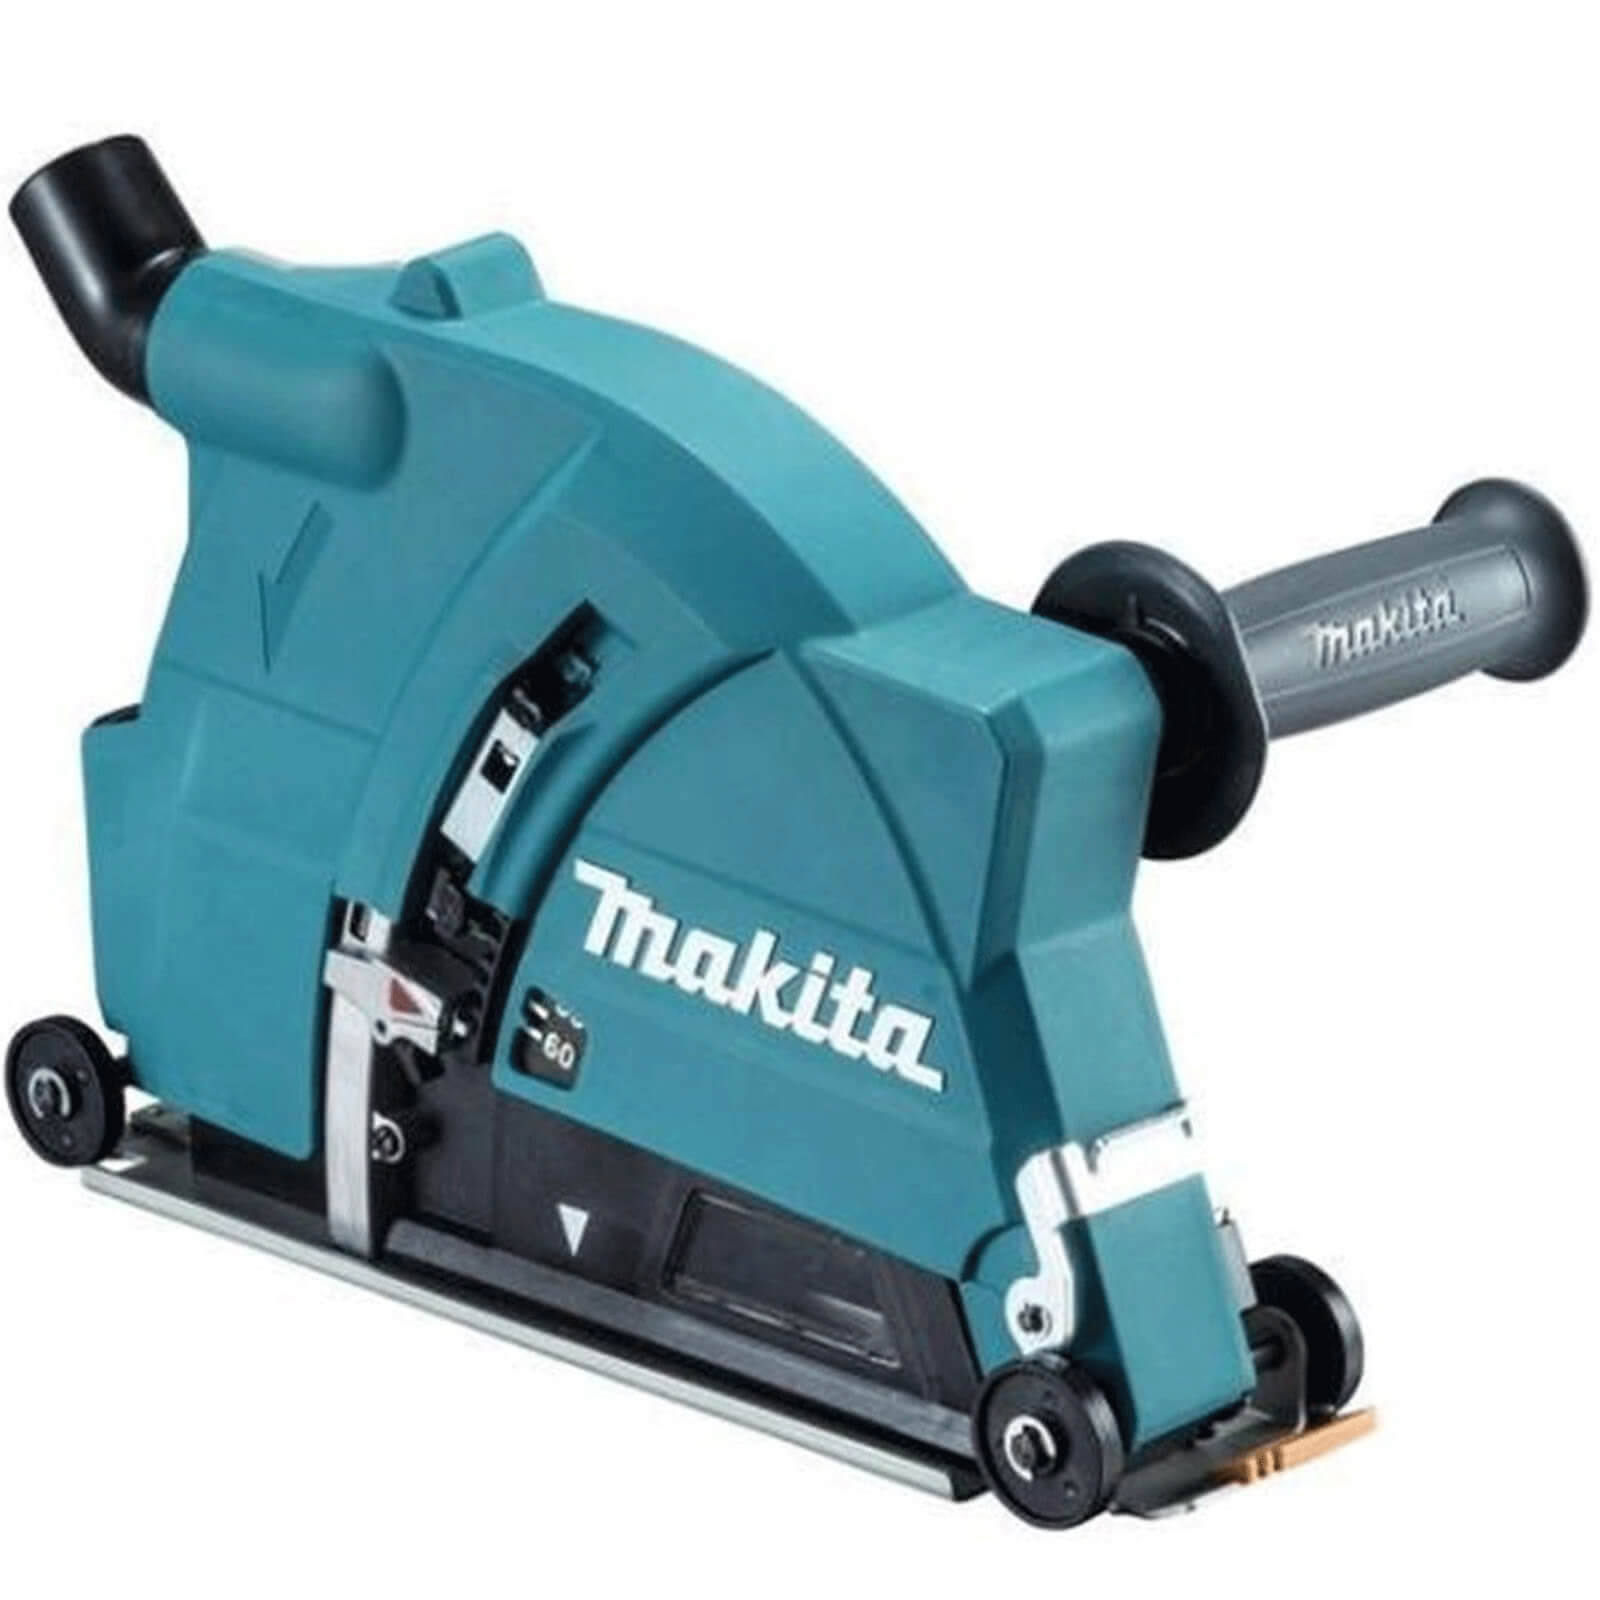 Photo of Makita 198440-5 Angle Grinder Dust Collecting Wheel Guard Attachment